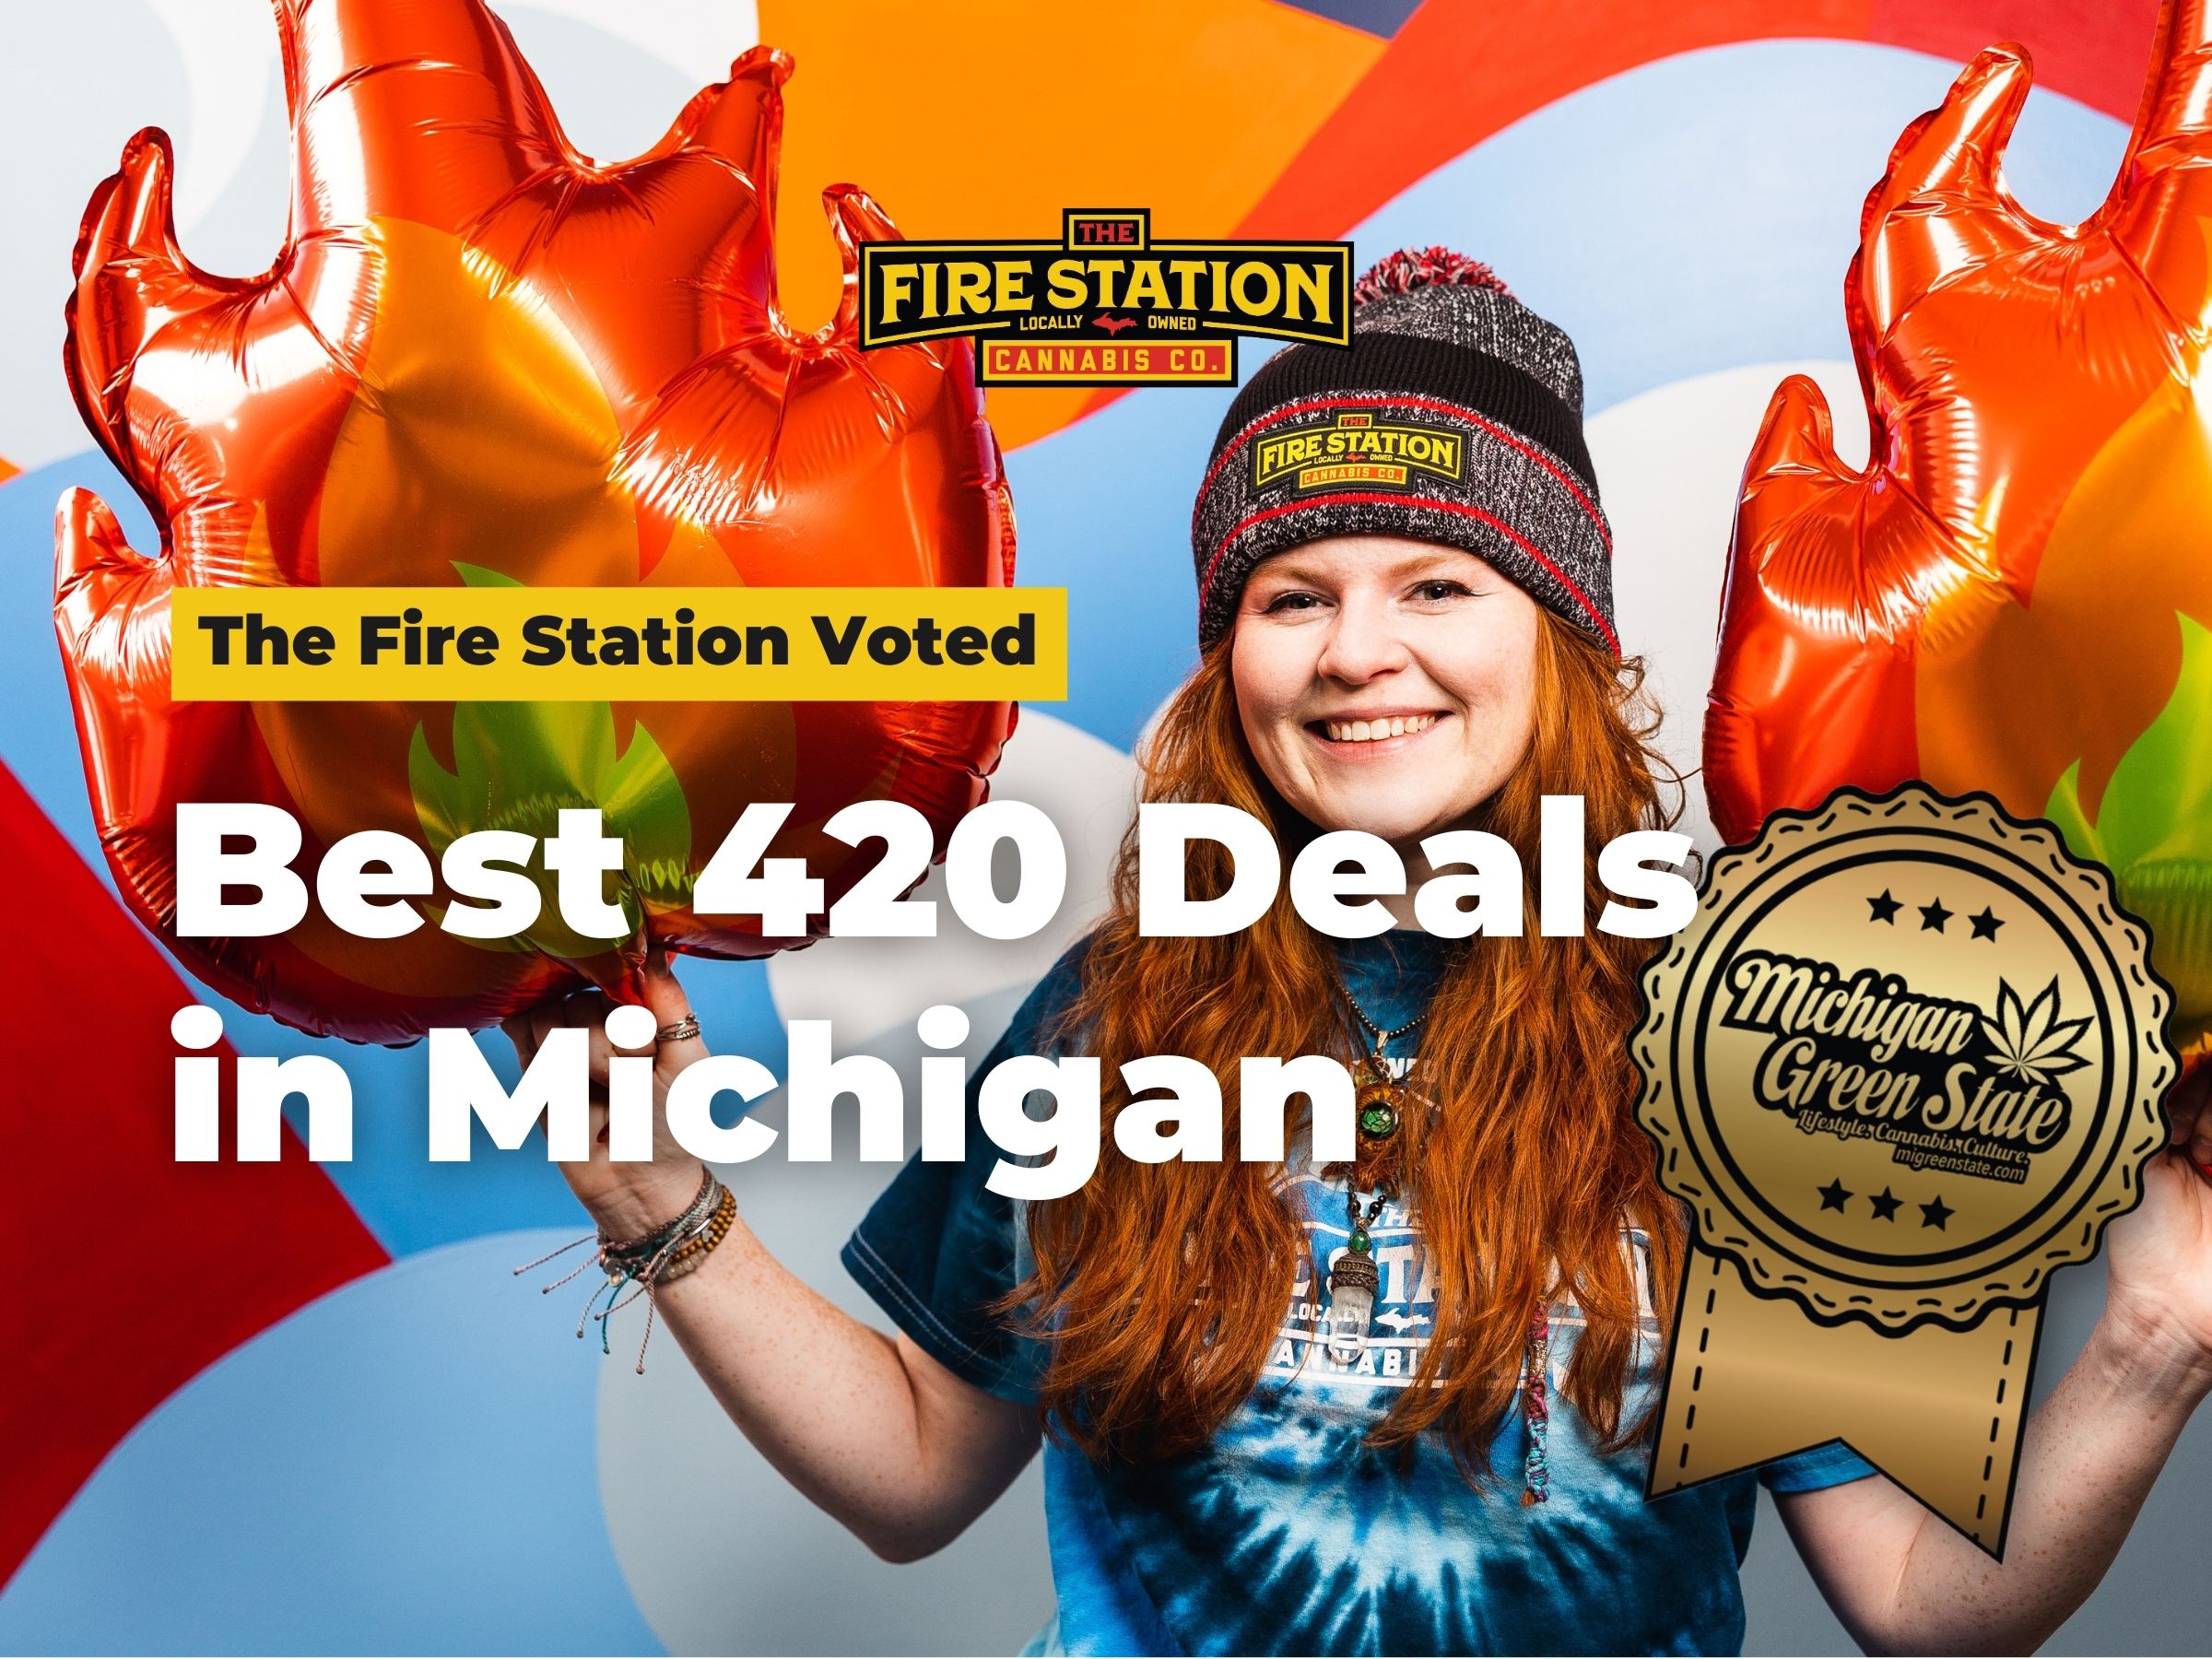 The Fire Station Cannabis Company was voted by fans ‘Best 420 Deals’ in Michigan in the 2022-23 Michigan Green State Reader’s Choice Awards.